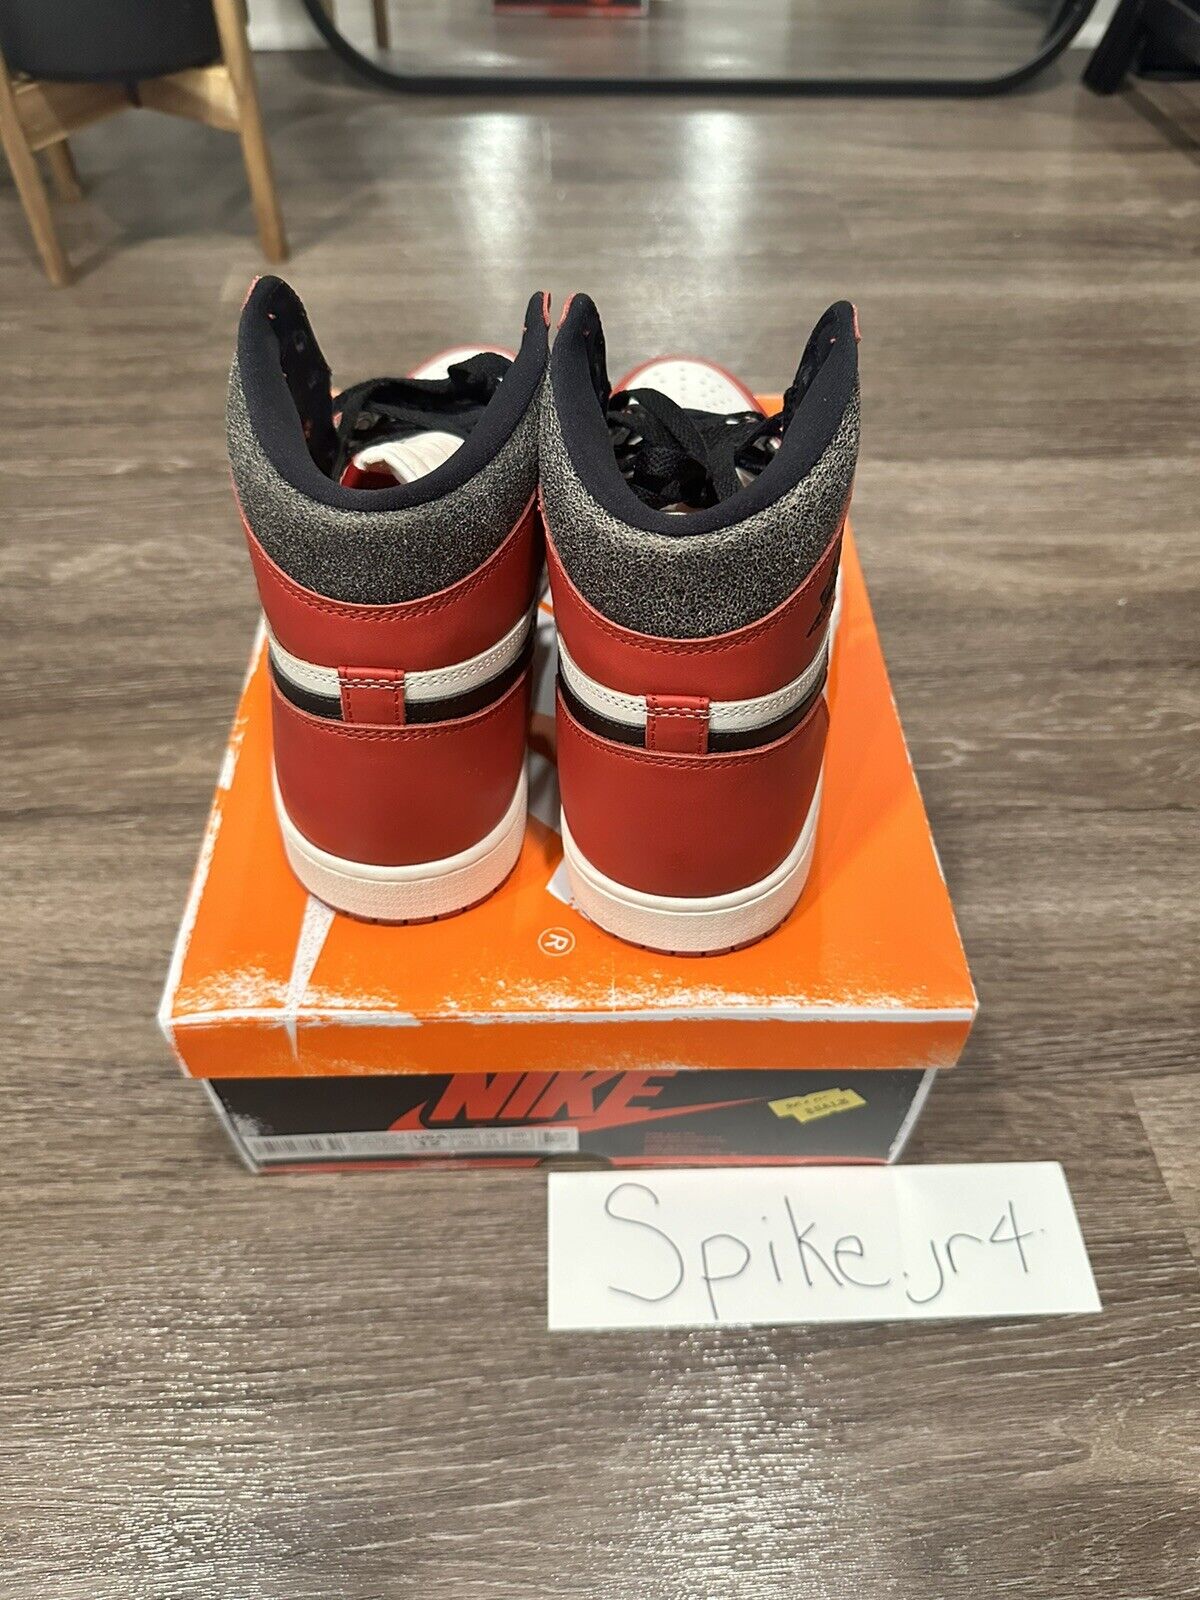 jordan 1 lost and found chicago - image 4